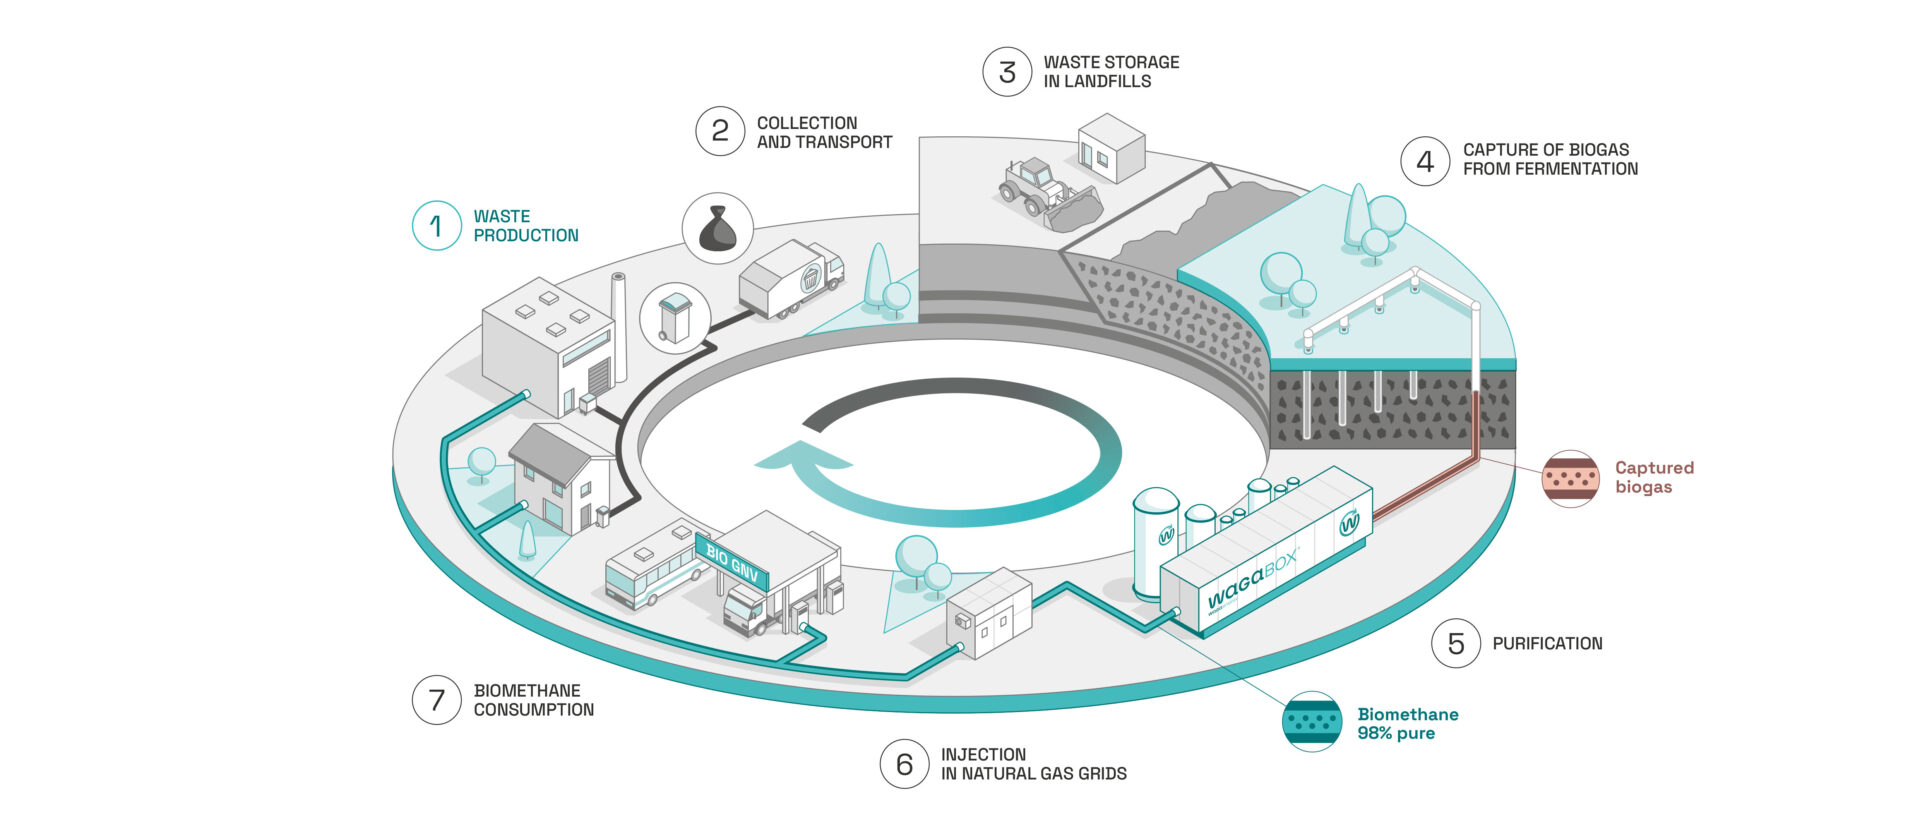 Illustration showing the place of Waga Energy and the WAGABOX in the circular economy. Step 1: Production of waste by individuals and industry. Step 2: Collection and transportation of this waste. Step 3: Burial of waste in a non-hazardous waste storage facility (ISDND). Step 4: Capture of the biogas produced by fermentation of the landfilled waste. Step 5: Biogas purification. Step 6: Injection of 98%-pure biomethane into the natural gas network. Step 7: Consumption of biomethane by residential and industrial customers.